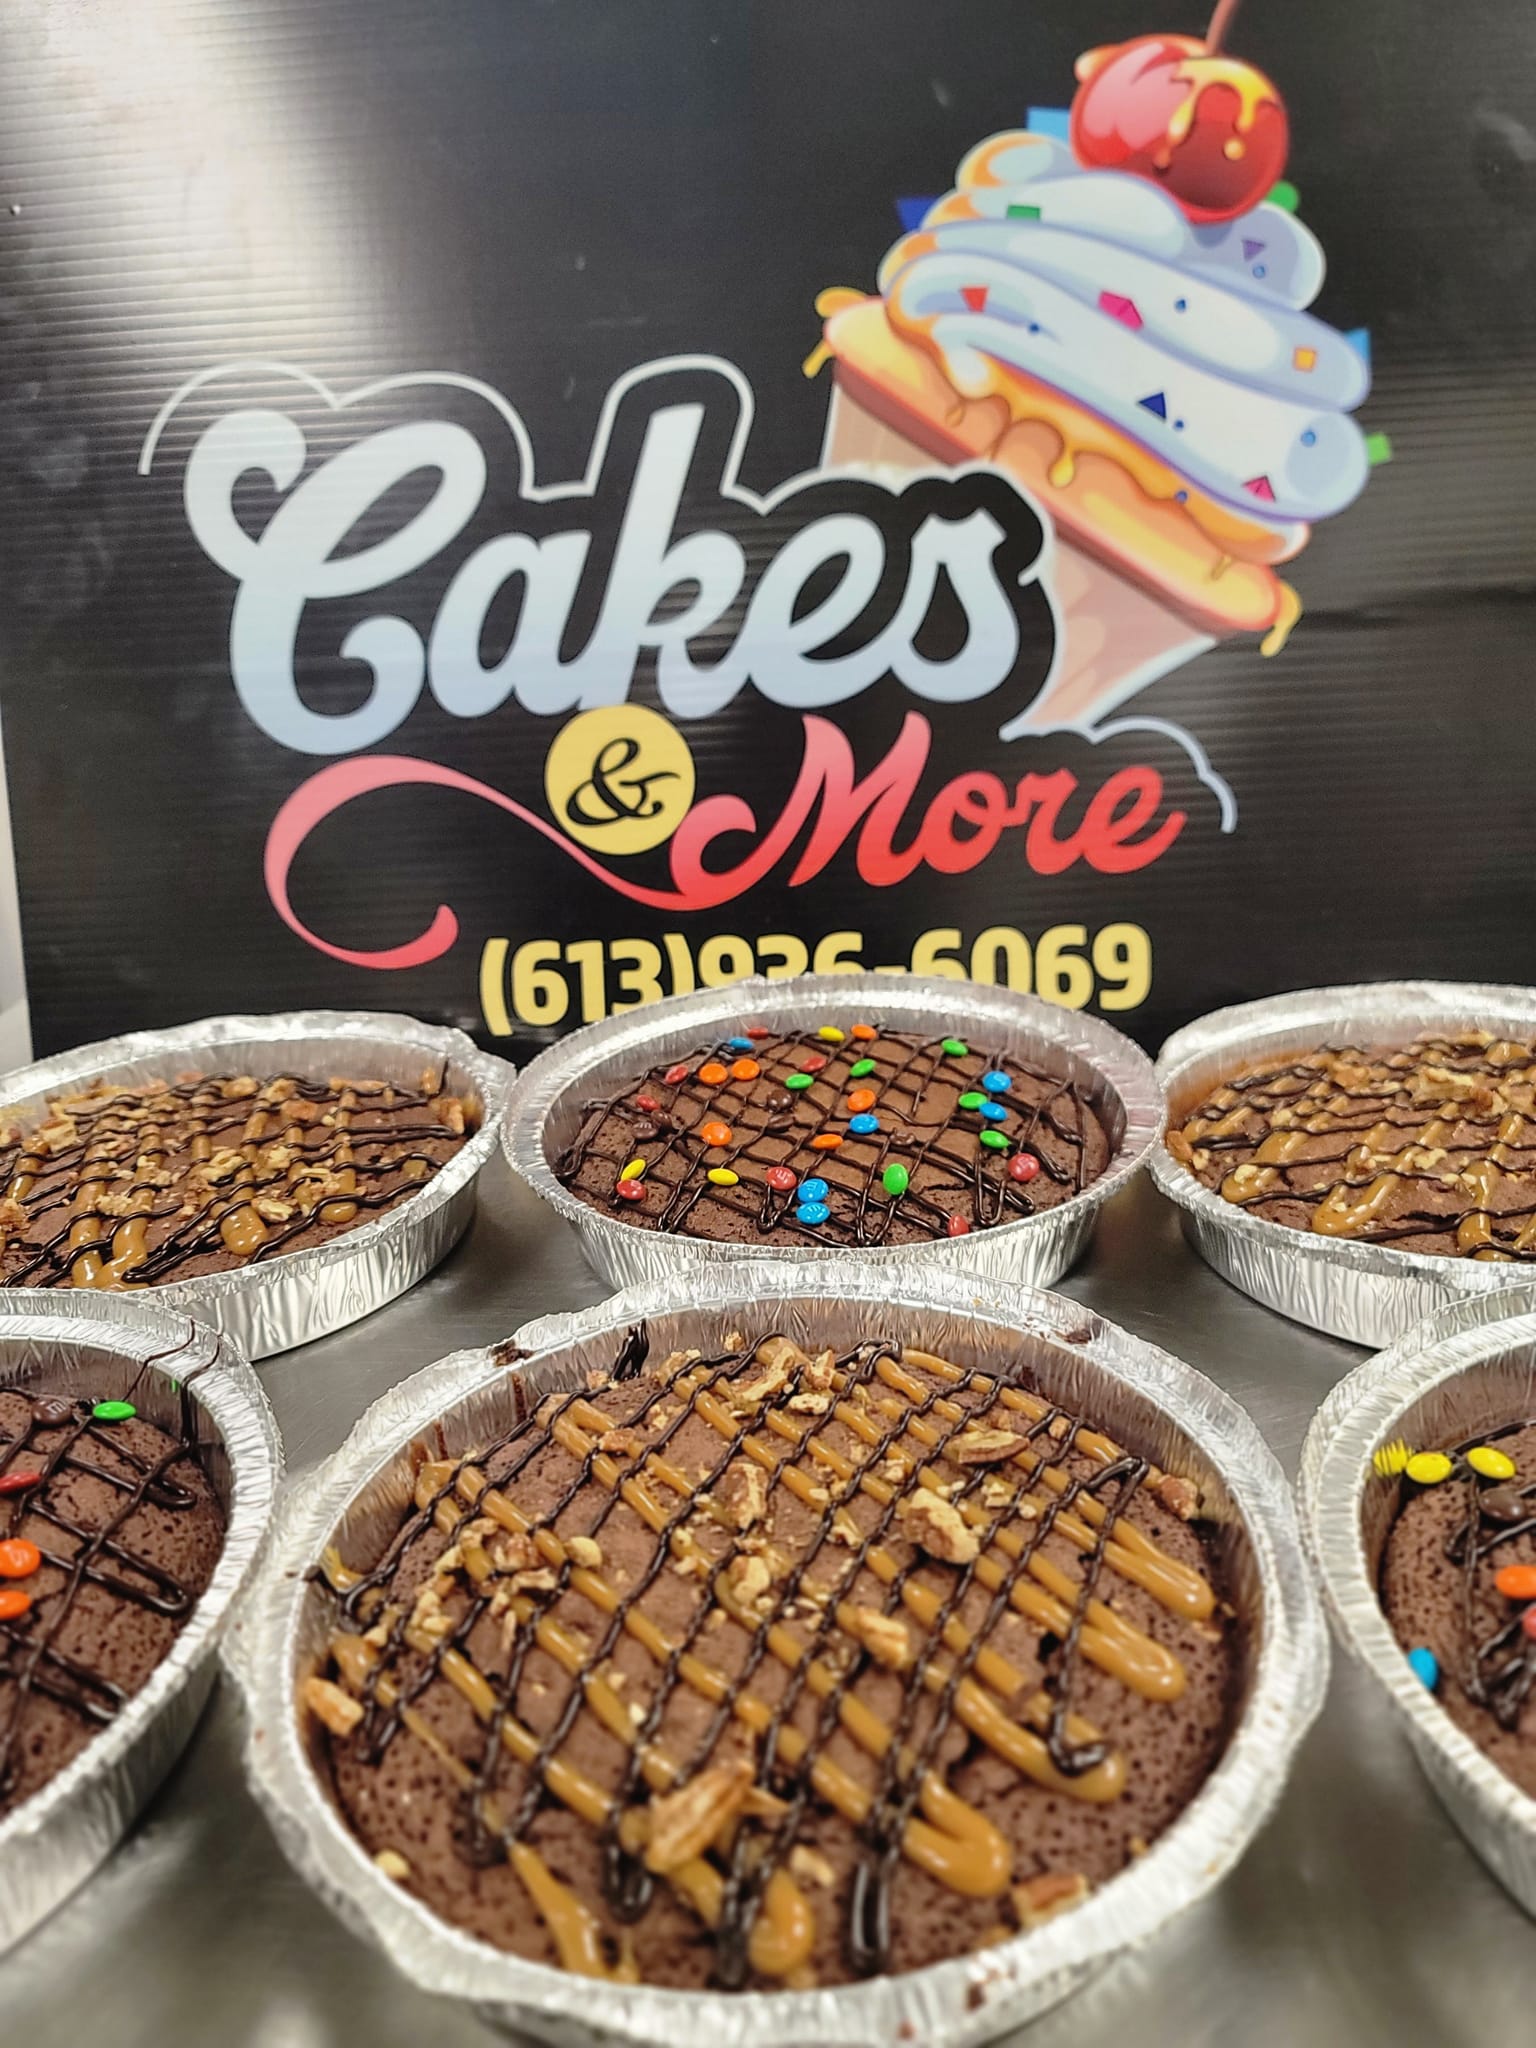 Cakes & More